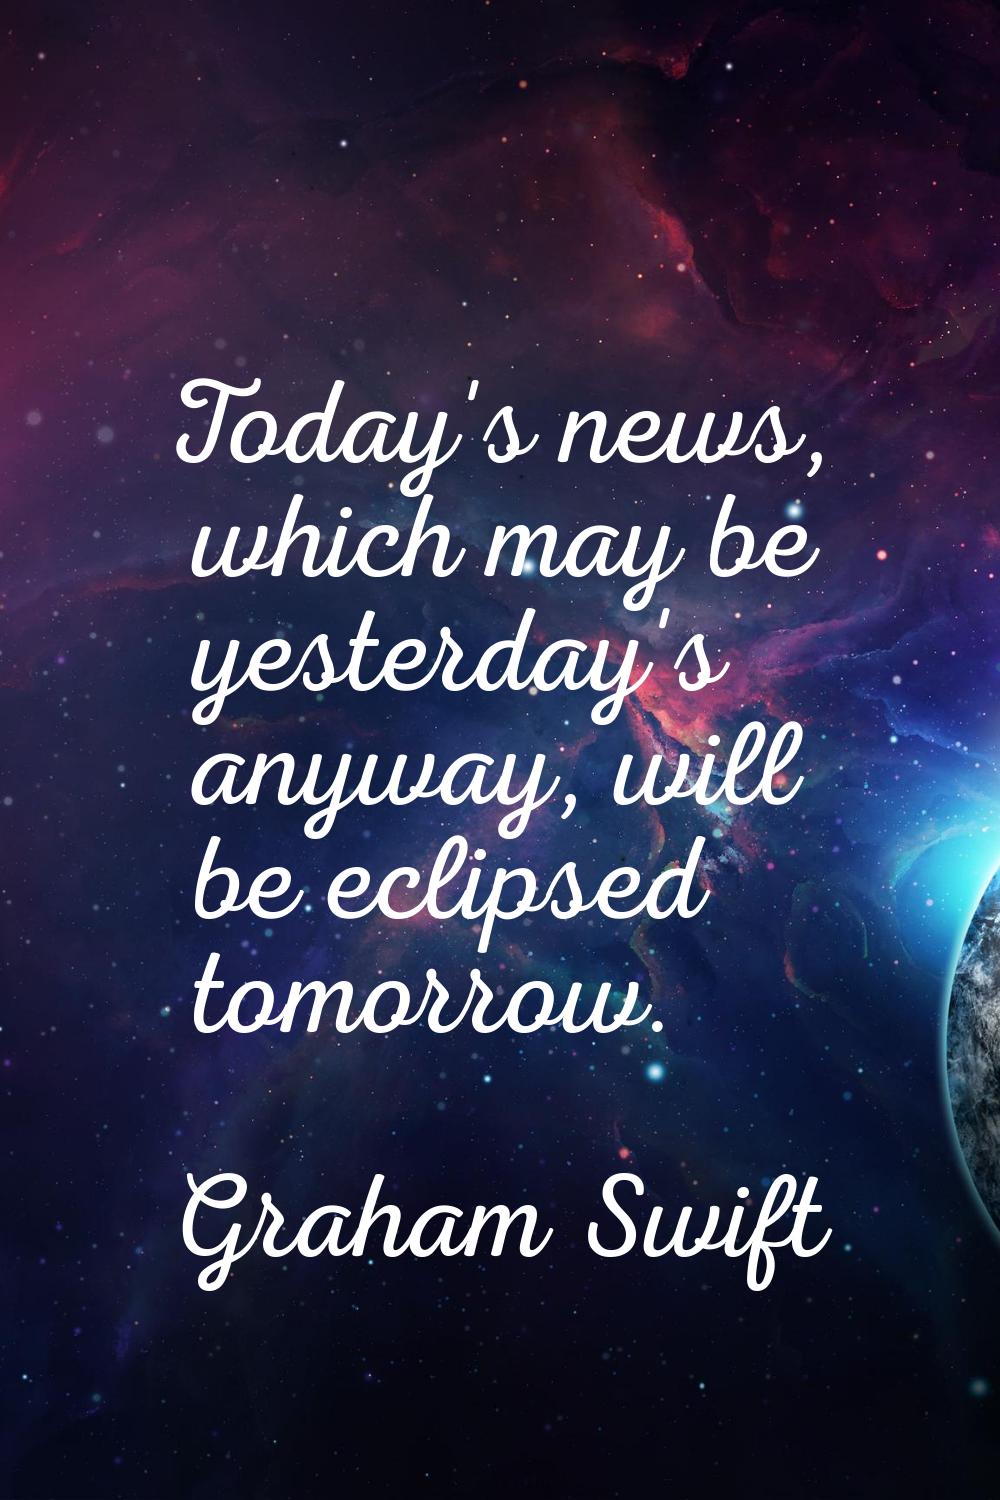 Today's news, which may be yesterday's anyway, will be eclipsed tomorrow.